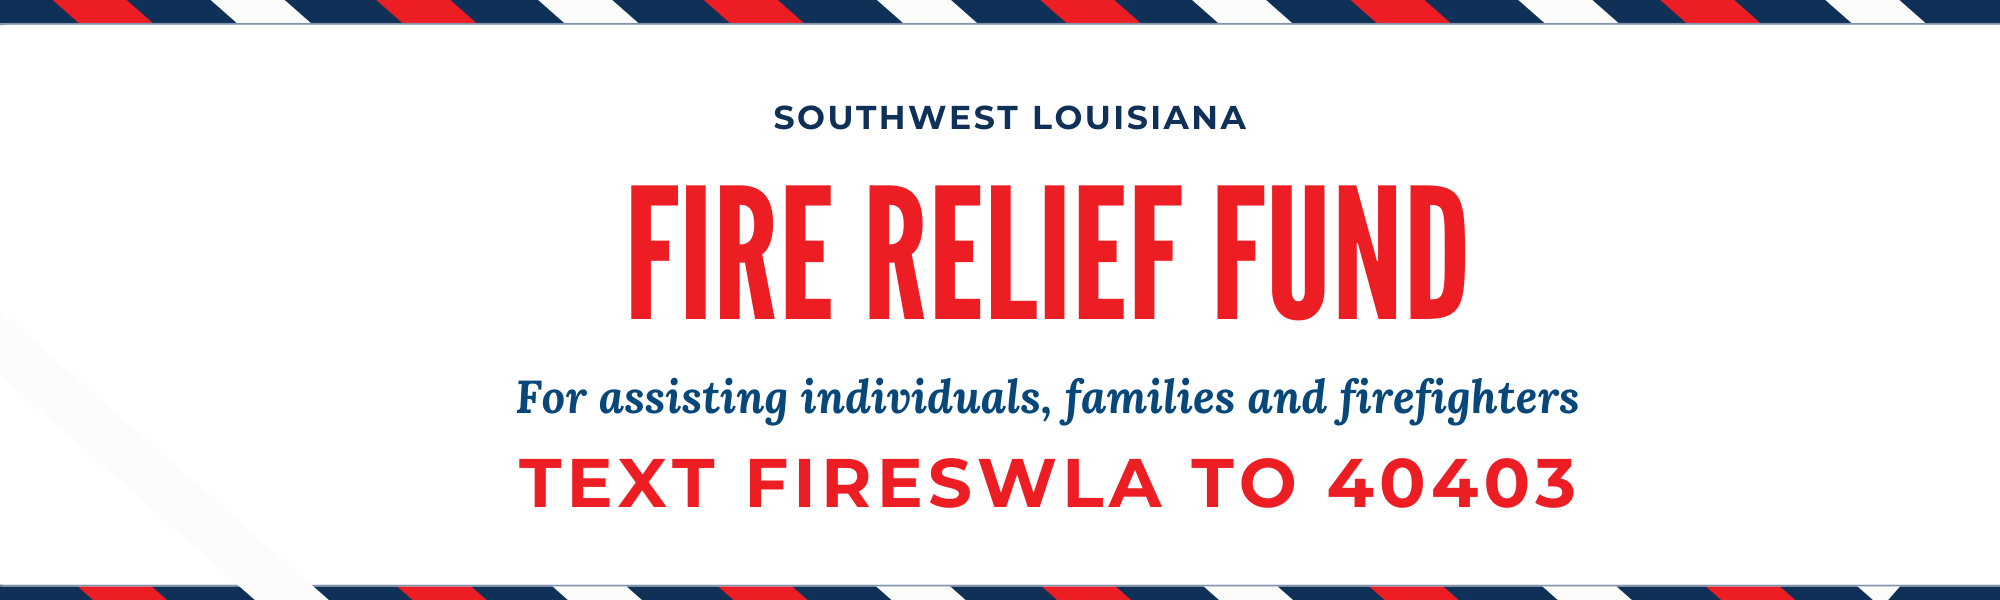 Fire Relief Fund for SWLA